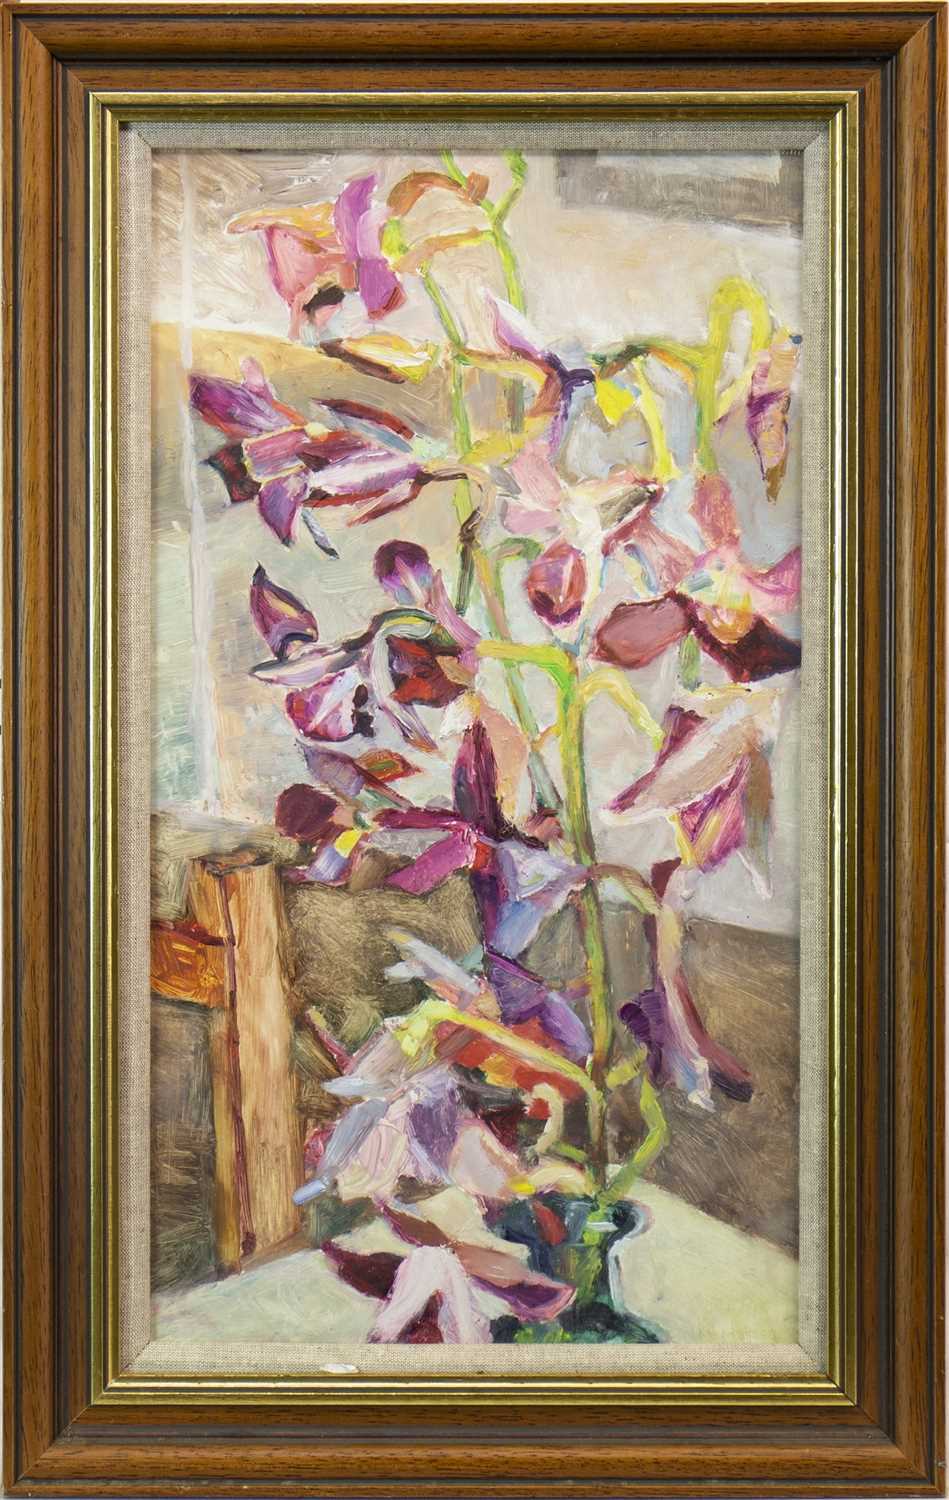 Lot 630 - FLORAL STILL LIFE, AN OIL BY ALMA WOLFSON